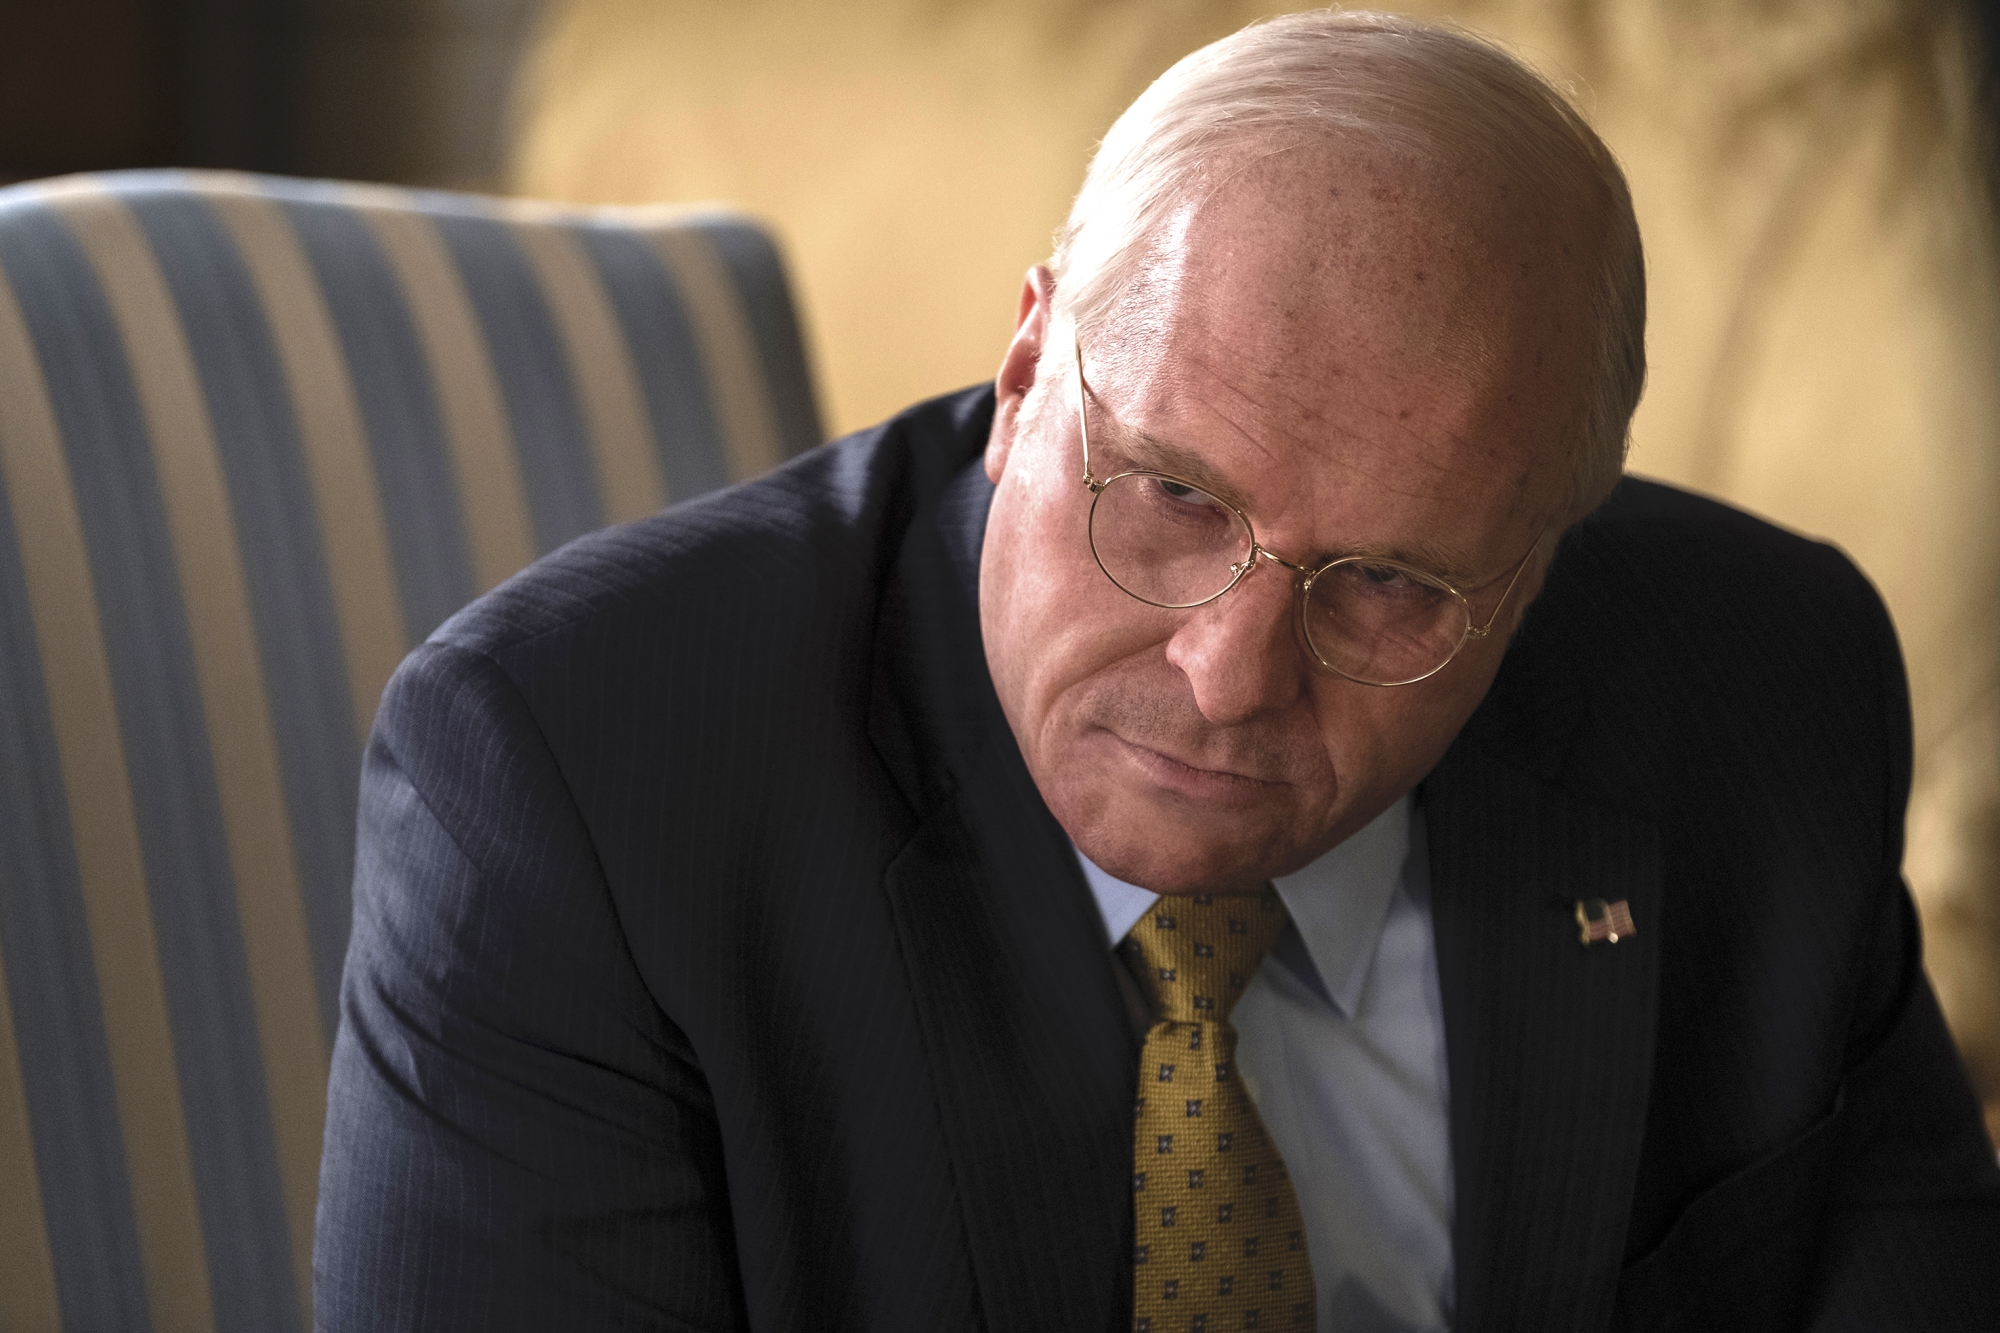 Christian Bale as Dick Cheney in Adam McKay’s VICE, an Annapurna Pictures release. 
Credit : Matt Kennedy / Annapurna Pictures
2018 © Annapurna Pictures, LLC. All Rights Reserved.